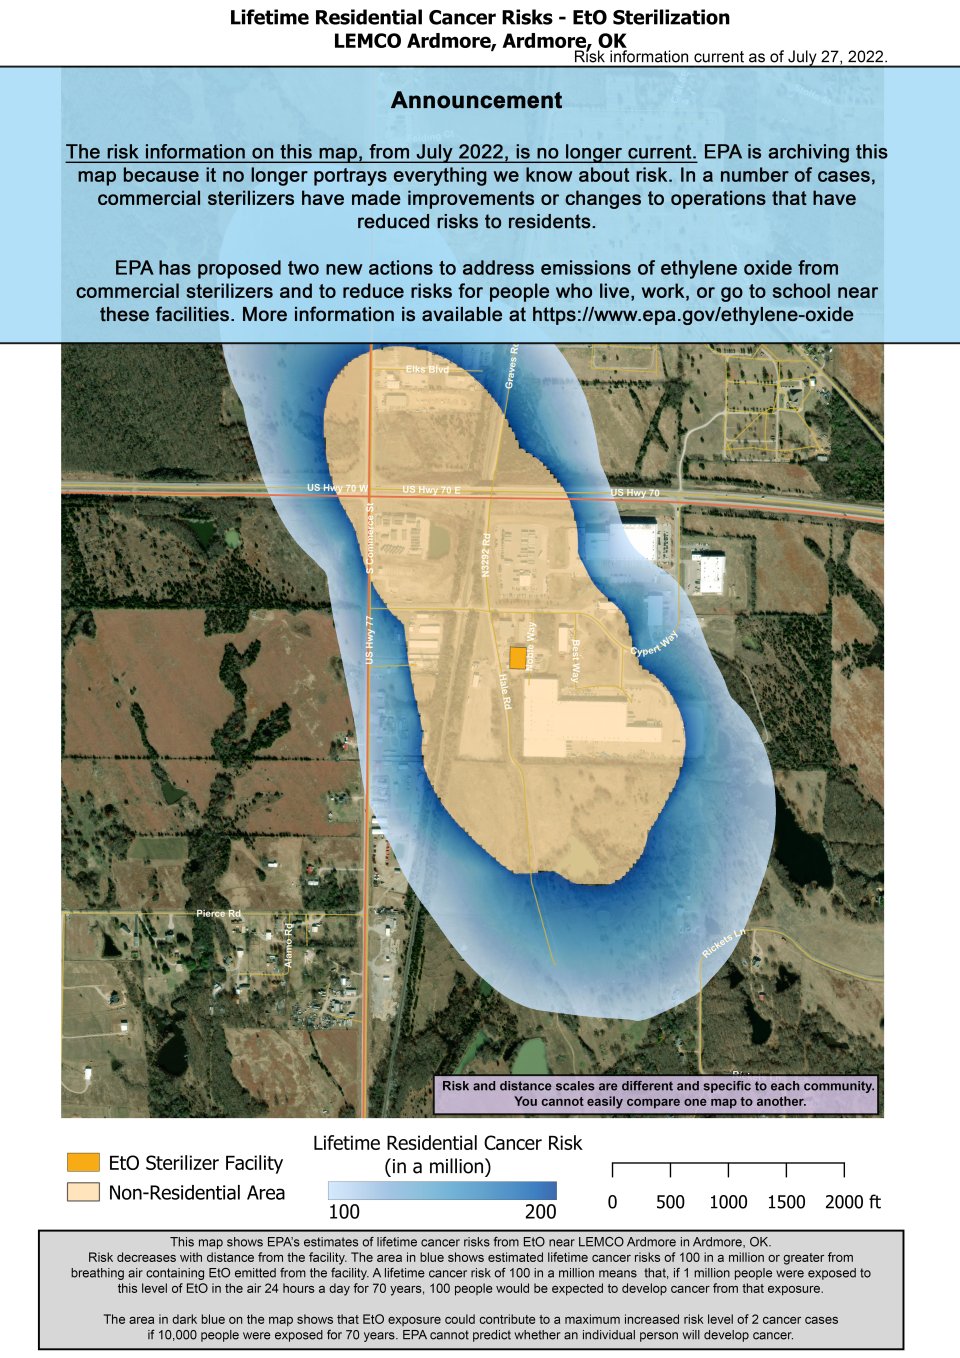 This map shows EPA’s estimate of lifetime cancer risks from breathing ethylene oxide near Lemco, 3204 Hale Rd Ardmore, OK 73401. Estimated cancer risk decreases with distance from the facility. Nearest the facility the estimated lifetime cancer risk is 200 in a million. Risk drops to 100 in a million and extends from near Elks Blvd (Nth) to Rickets Ln (Sth). The area extends to Cypert Way (East) and Rickets Ln (SE), Hwy 77 (SW) and extends to the tree line located NW of the intersection of Hwy 70 and Hwy 77